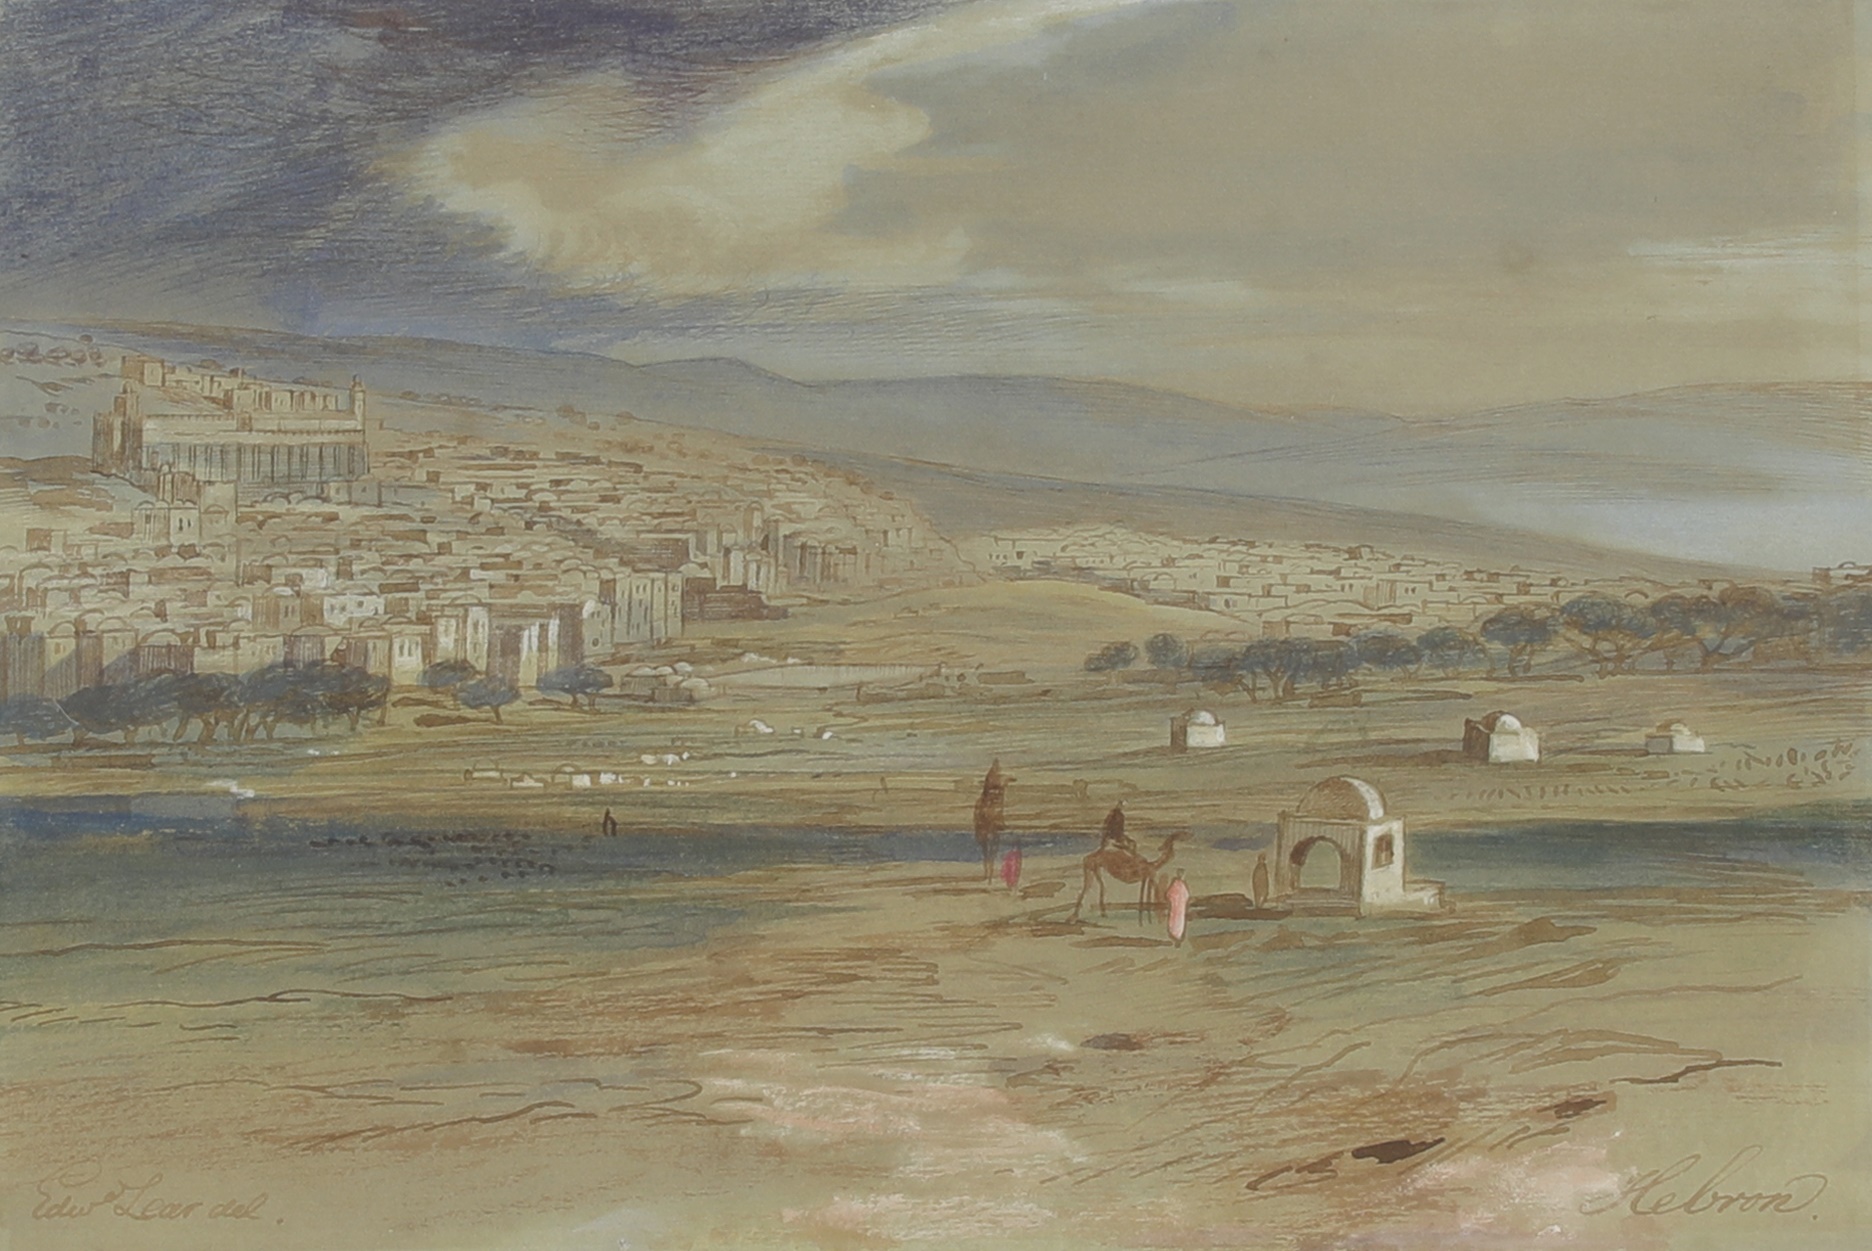 Edward Lear (1812-1888) 'Hebron', figures and camels, the city beyond, c.1858 £5,000-£8,000